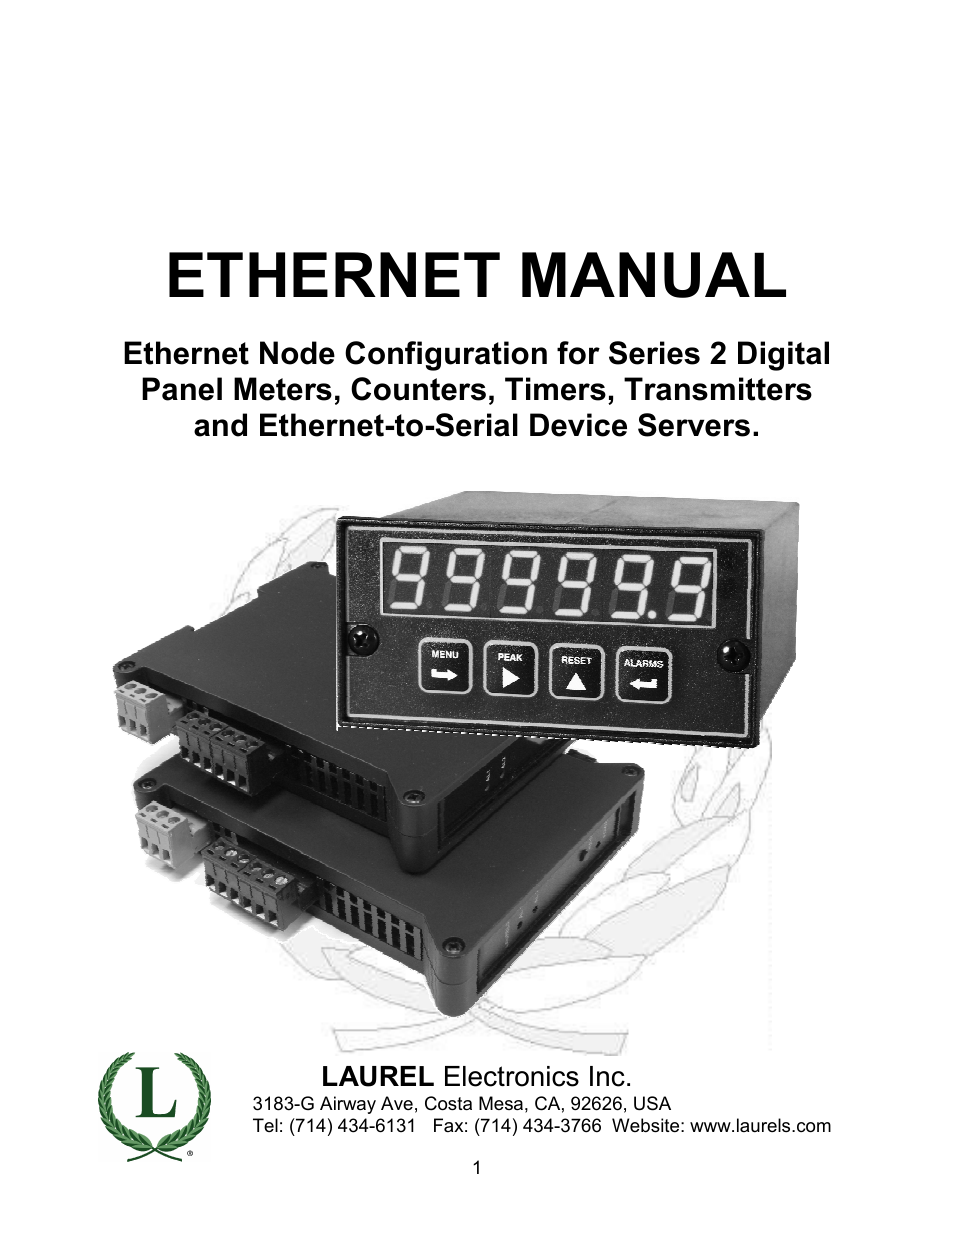 Ethernet Node Configuration for Series 2 Digital Panel Meters, Counters, Timers, Transmitters and Ethernet-to-Serial Device Servers